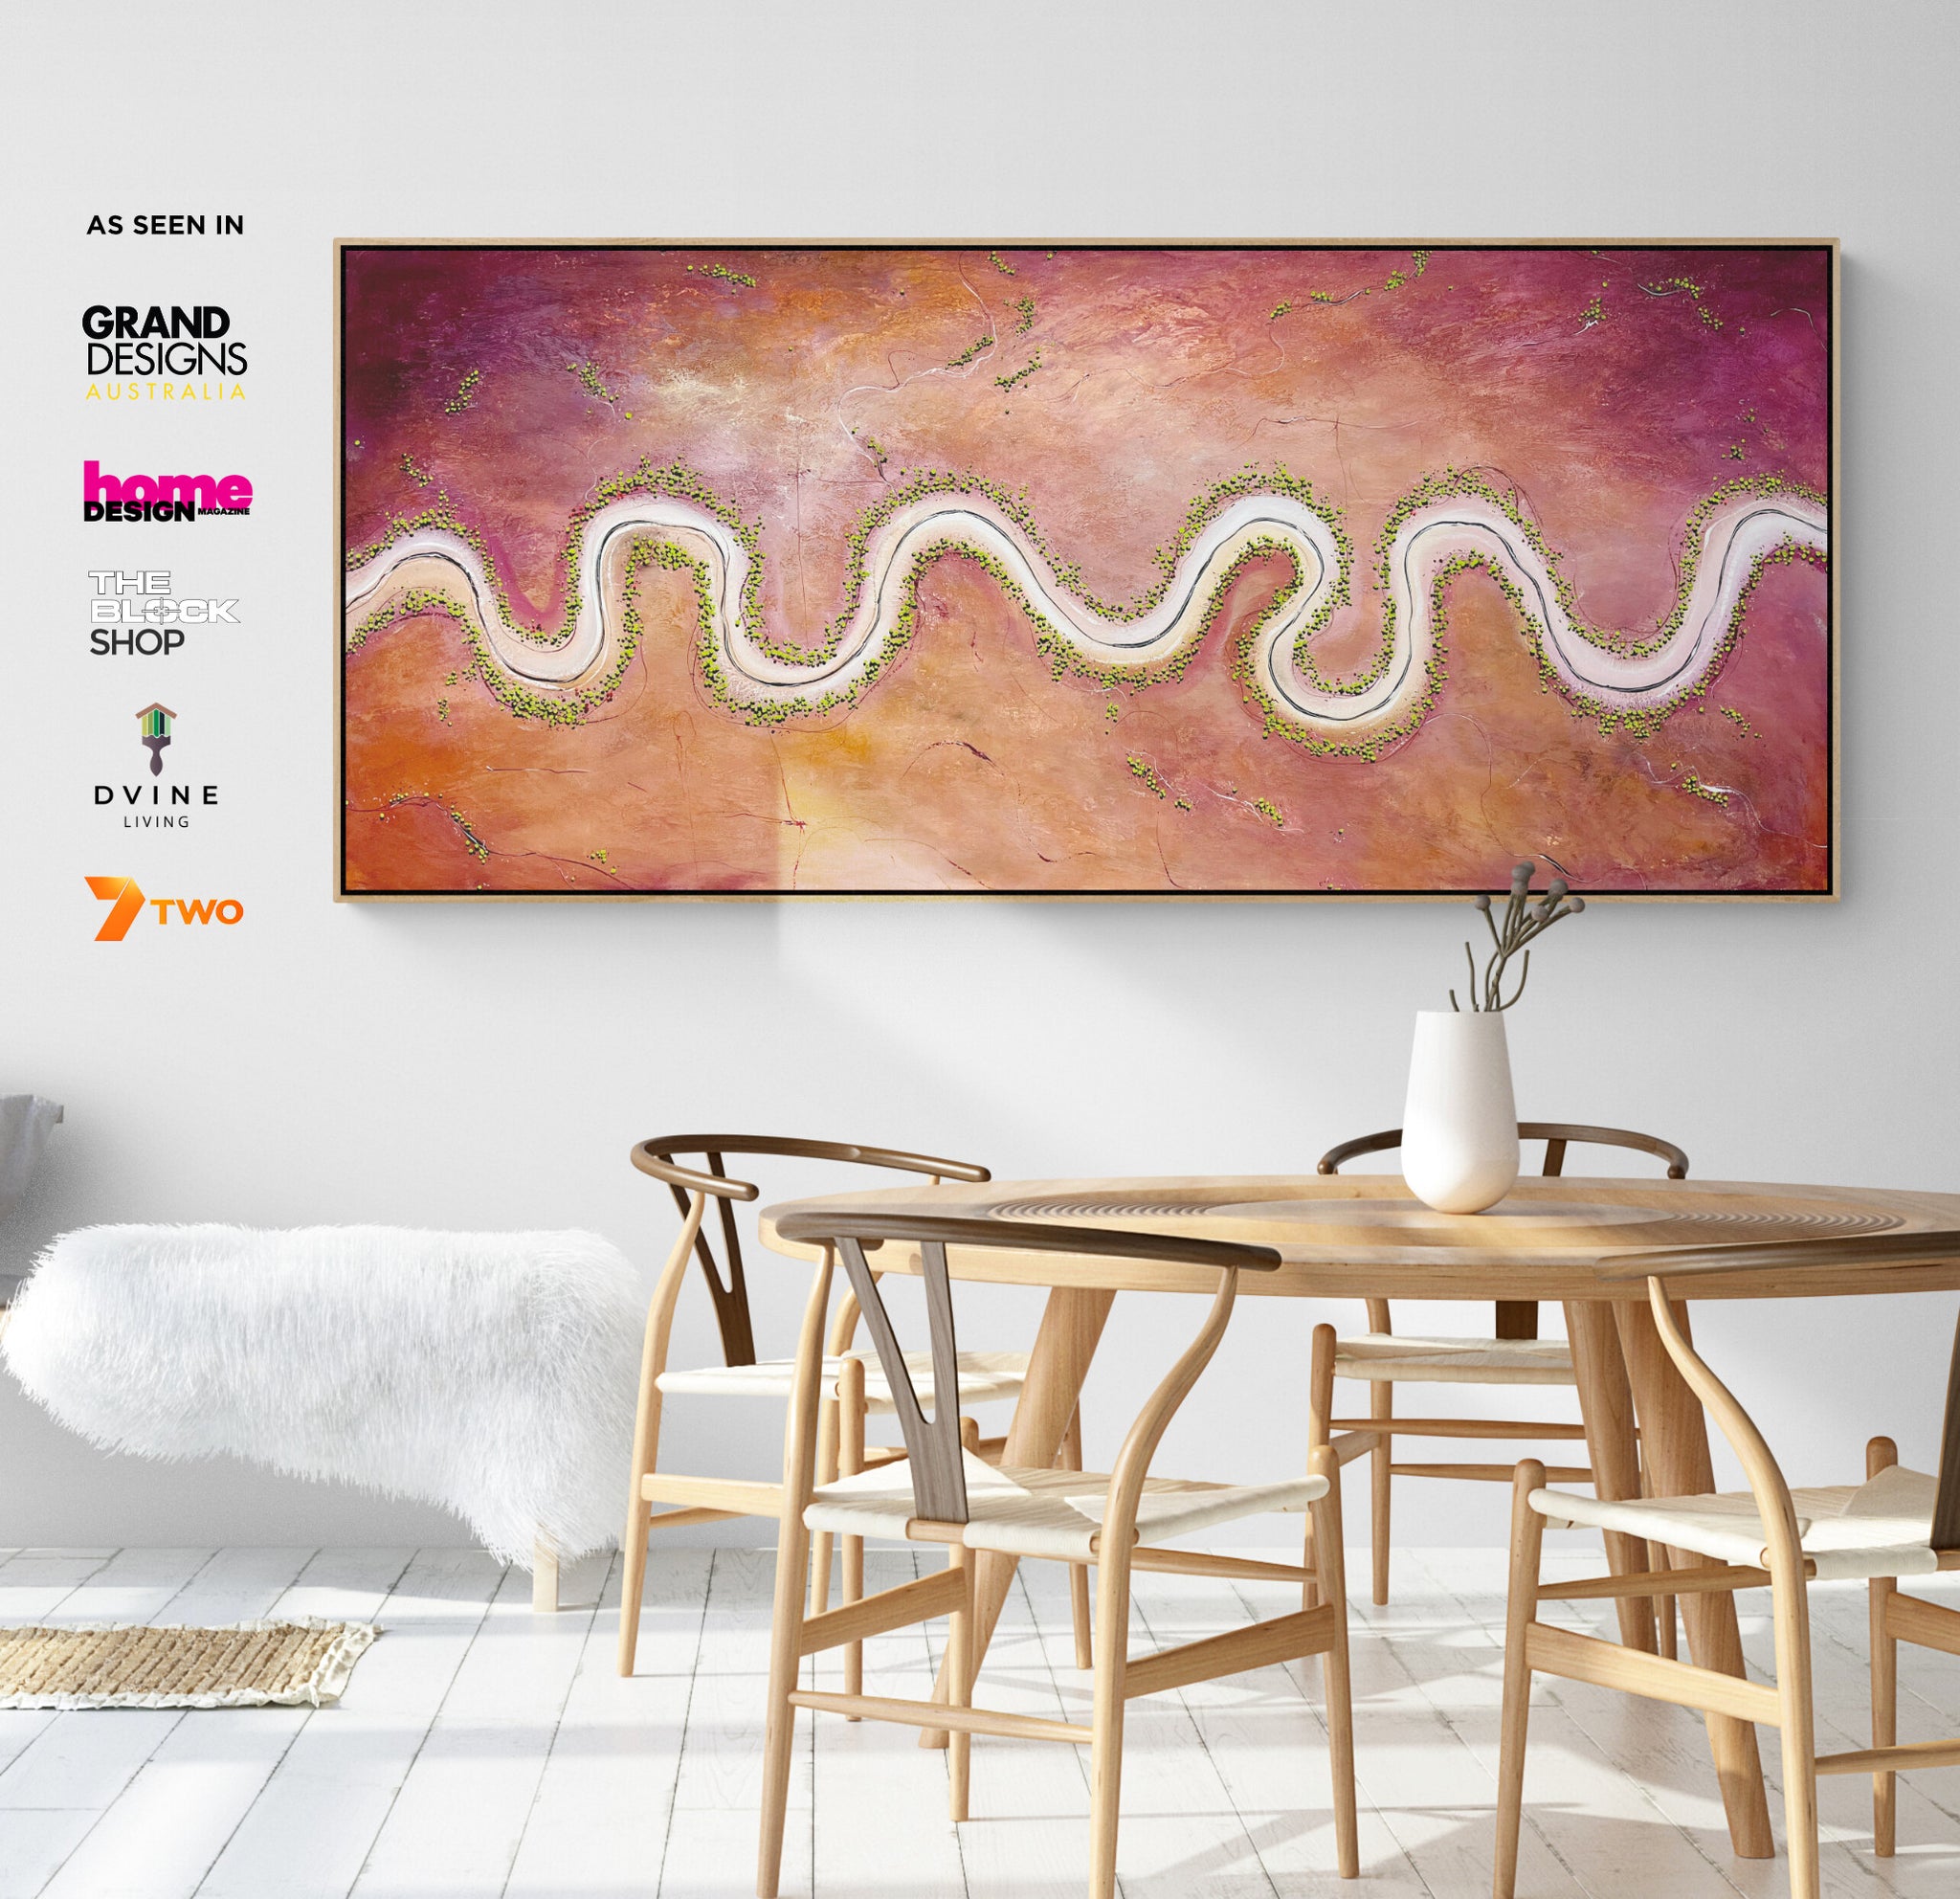 Winding River of Promise (160x70CM)